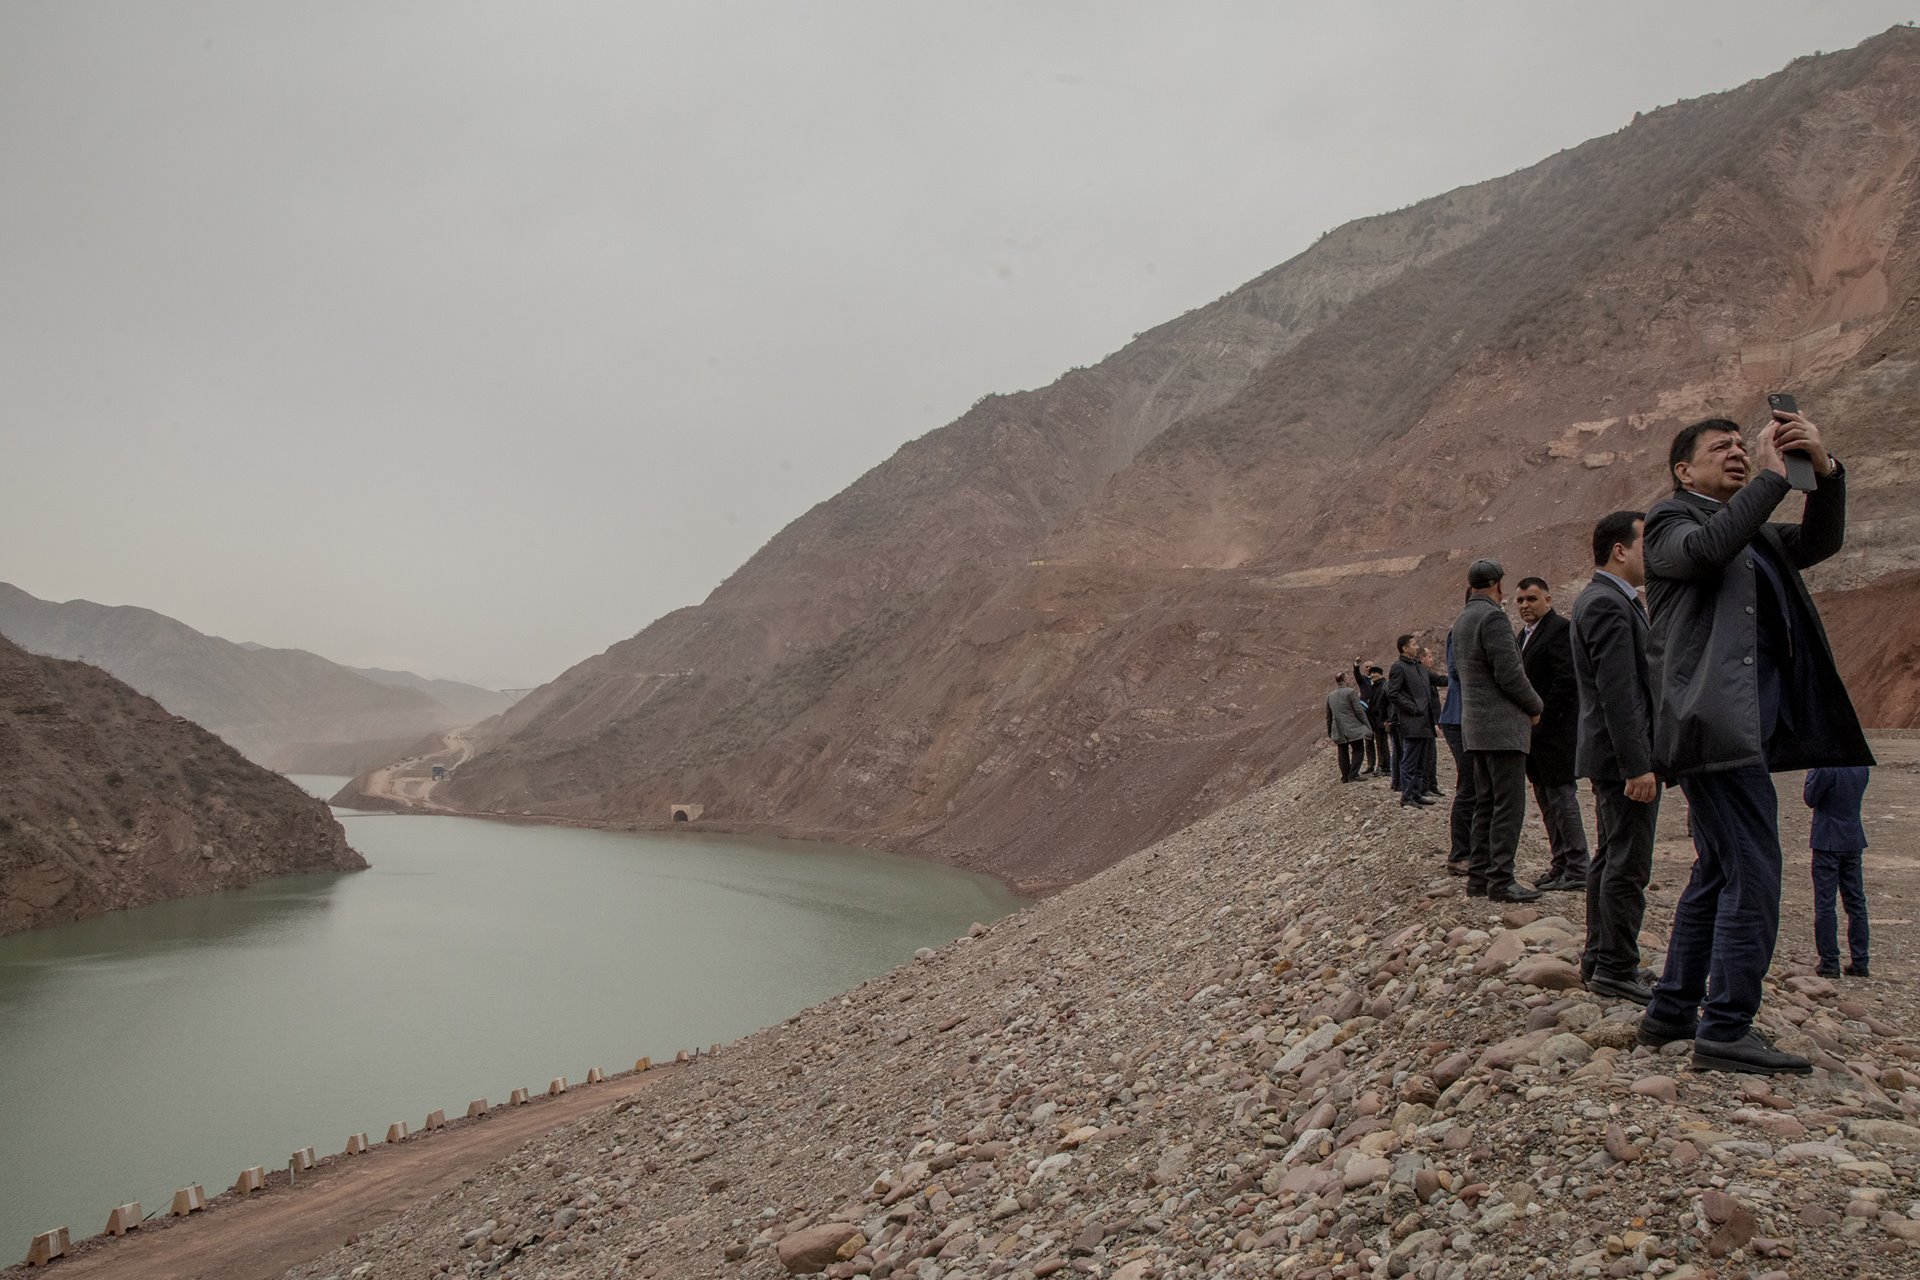 Visitors photograph the Rogun Dam, being built in eastern Tajikistan to provide hydroelectric power. The 335-meter-high dam is due for completion in 2028-2029.